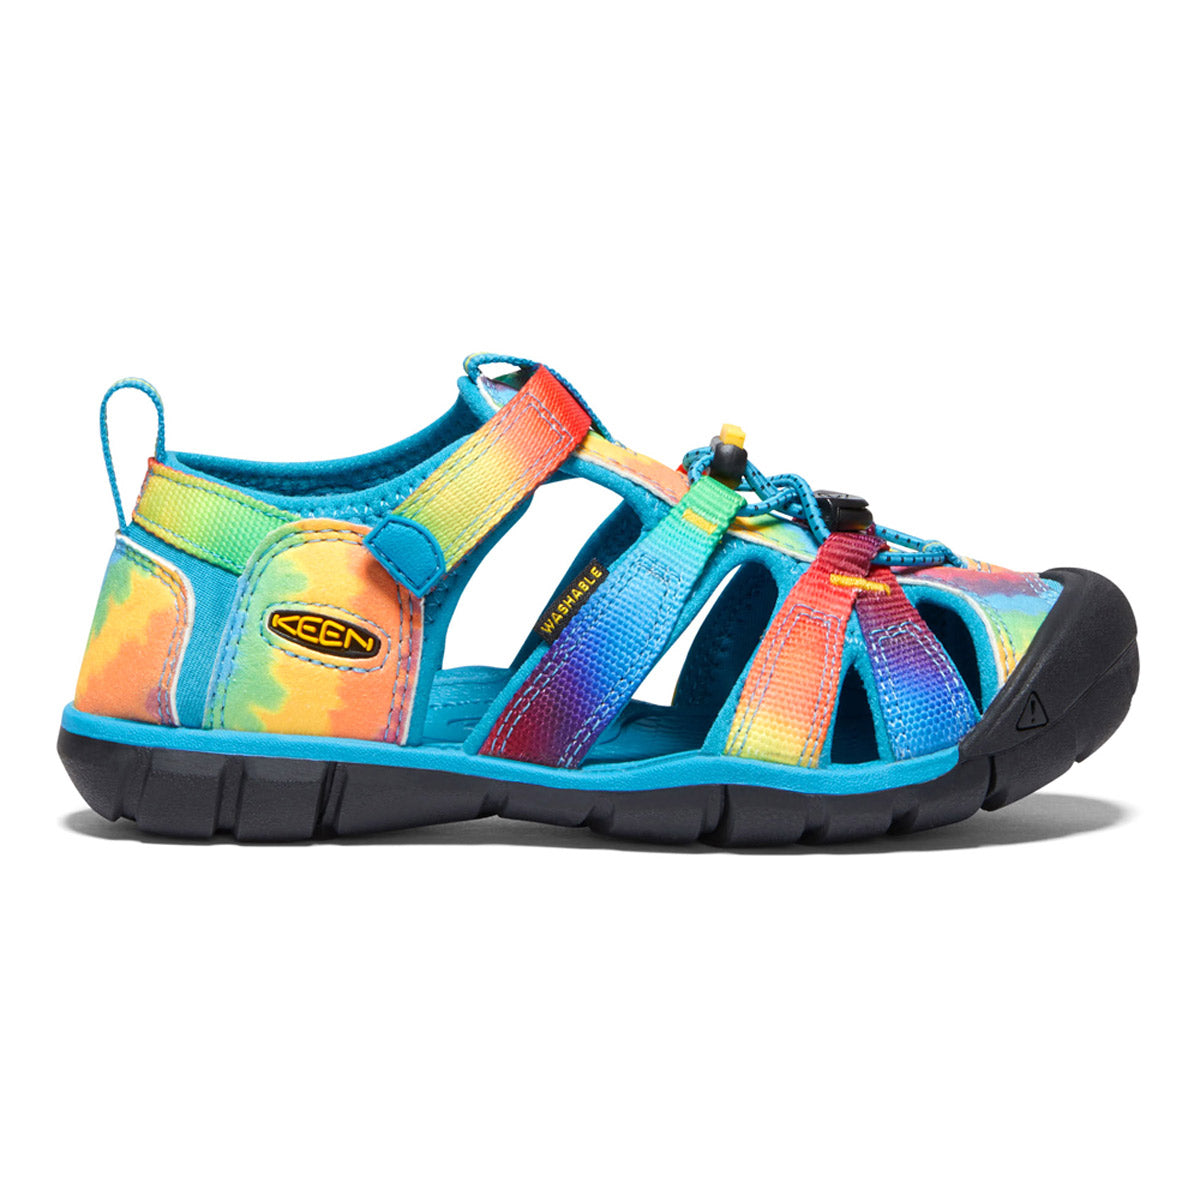 Colorful children's Keen Seacamp II CNX sandals with a closed toe and adjustable strap via the Secure Fit Lace Capture System.